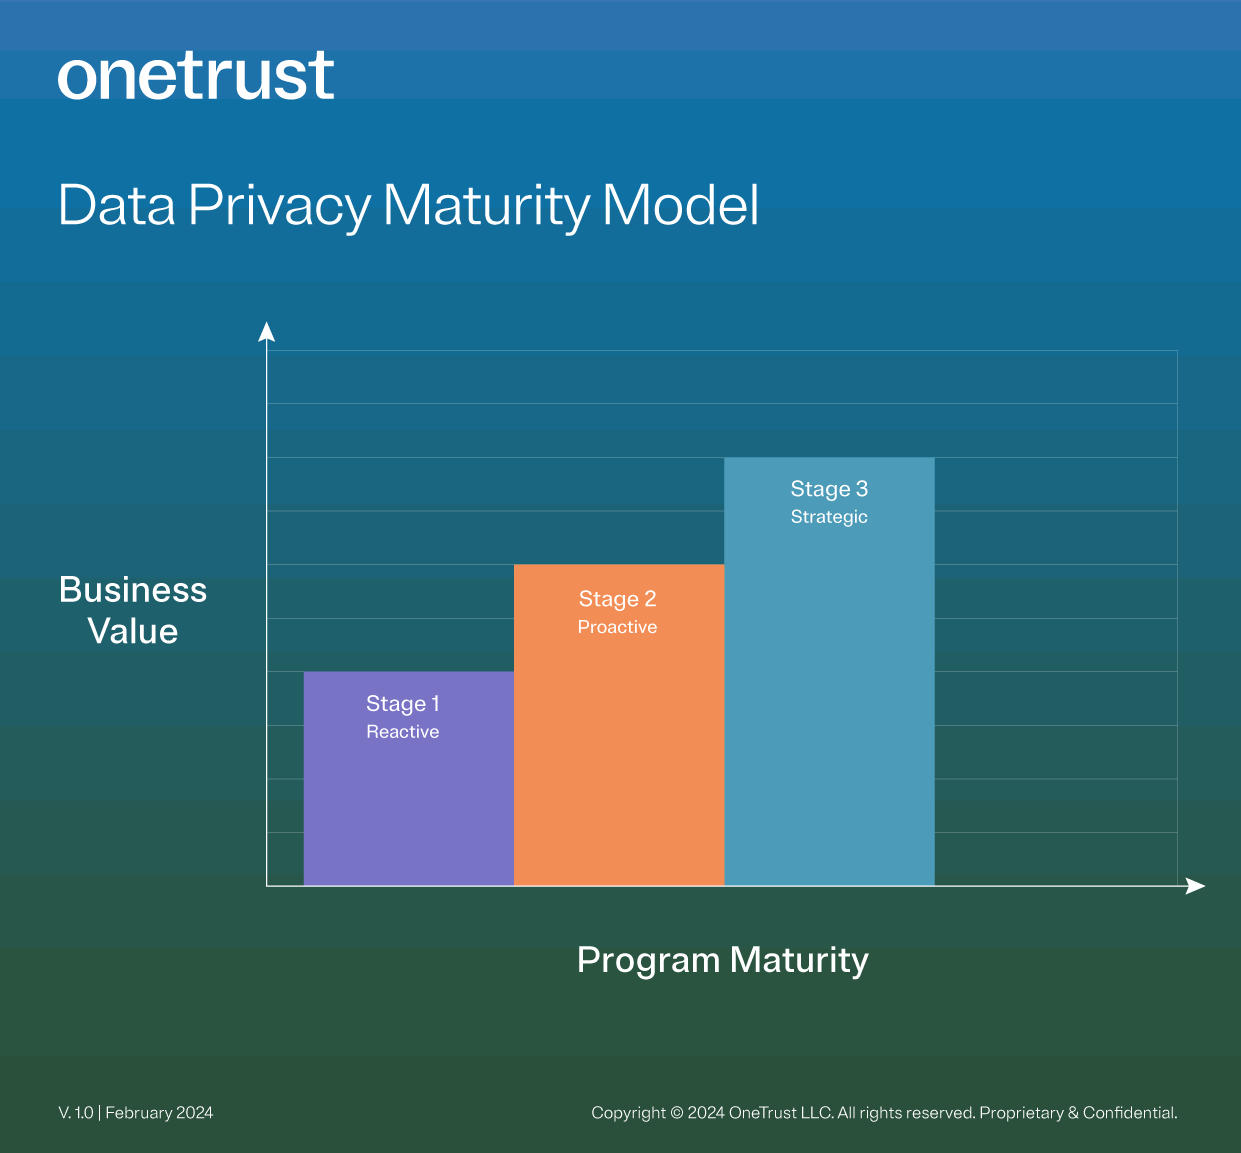 Bar graph showing the relationship between the first three maturity stages of a data privacy program and their business value.